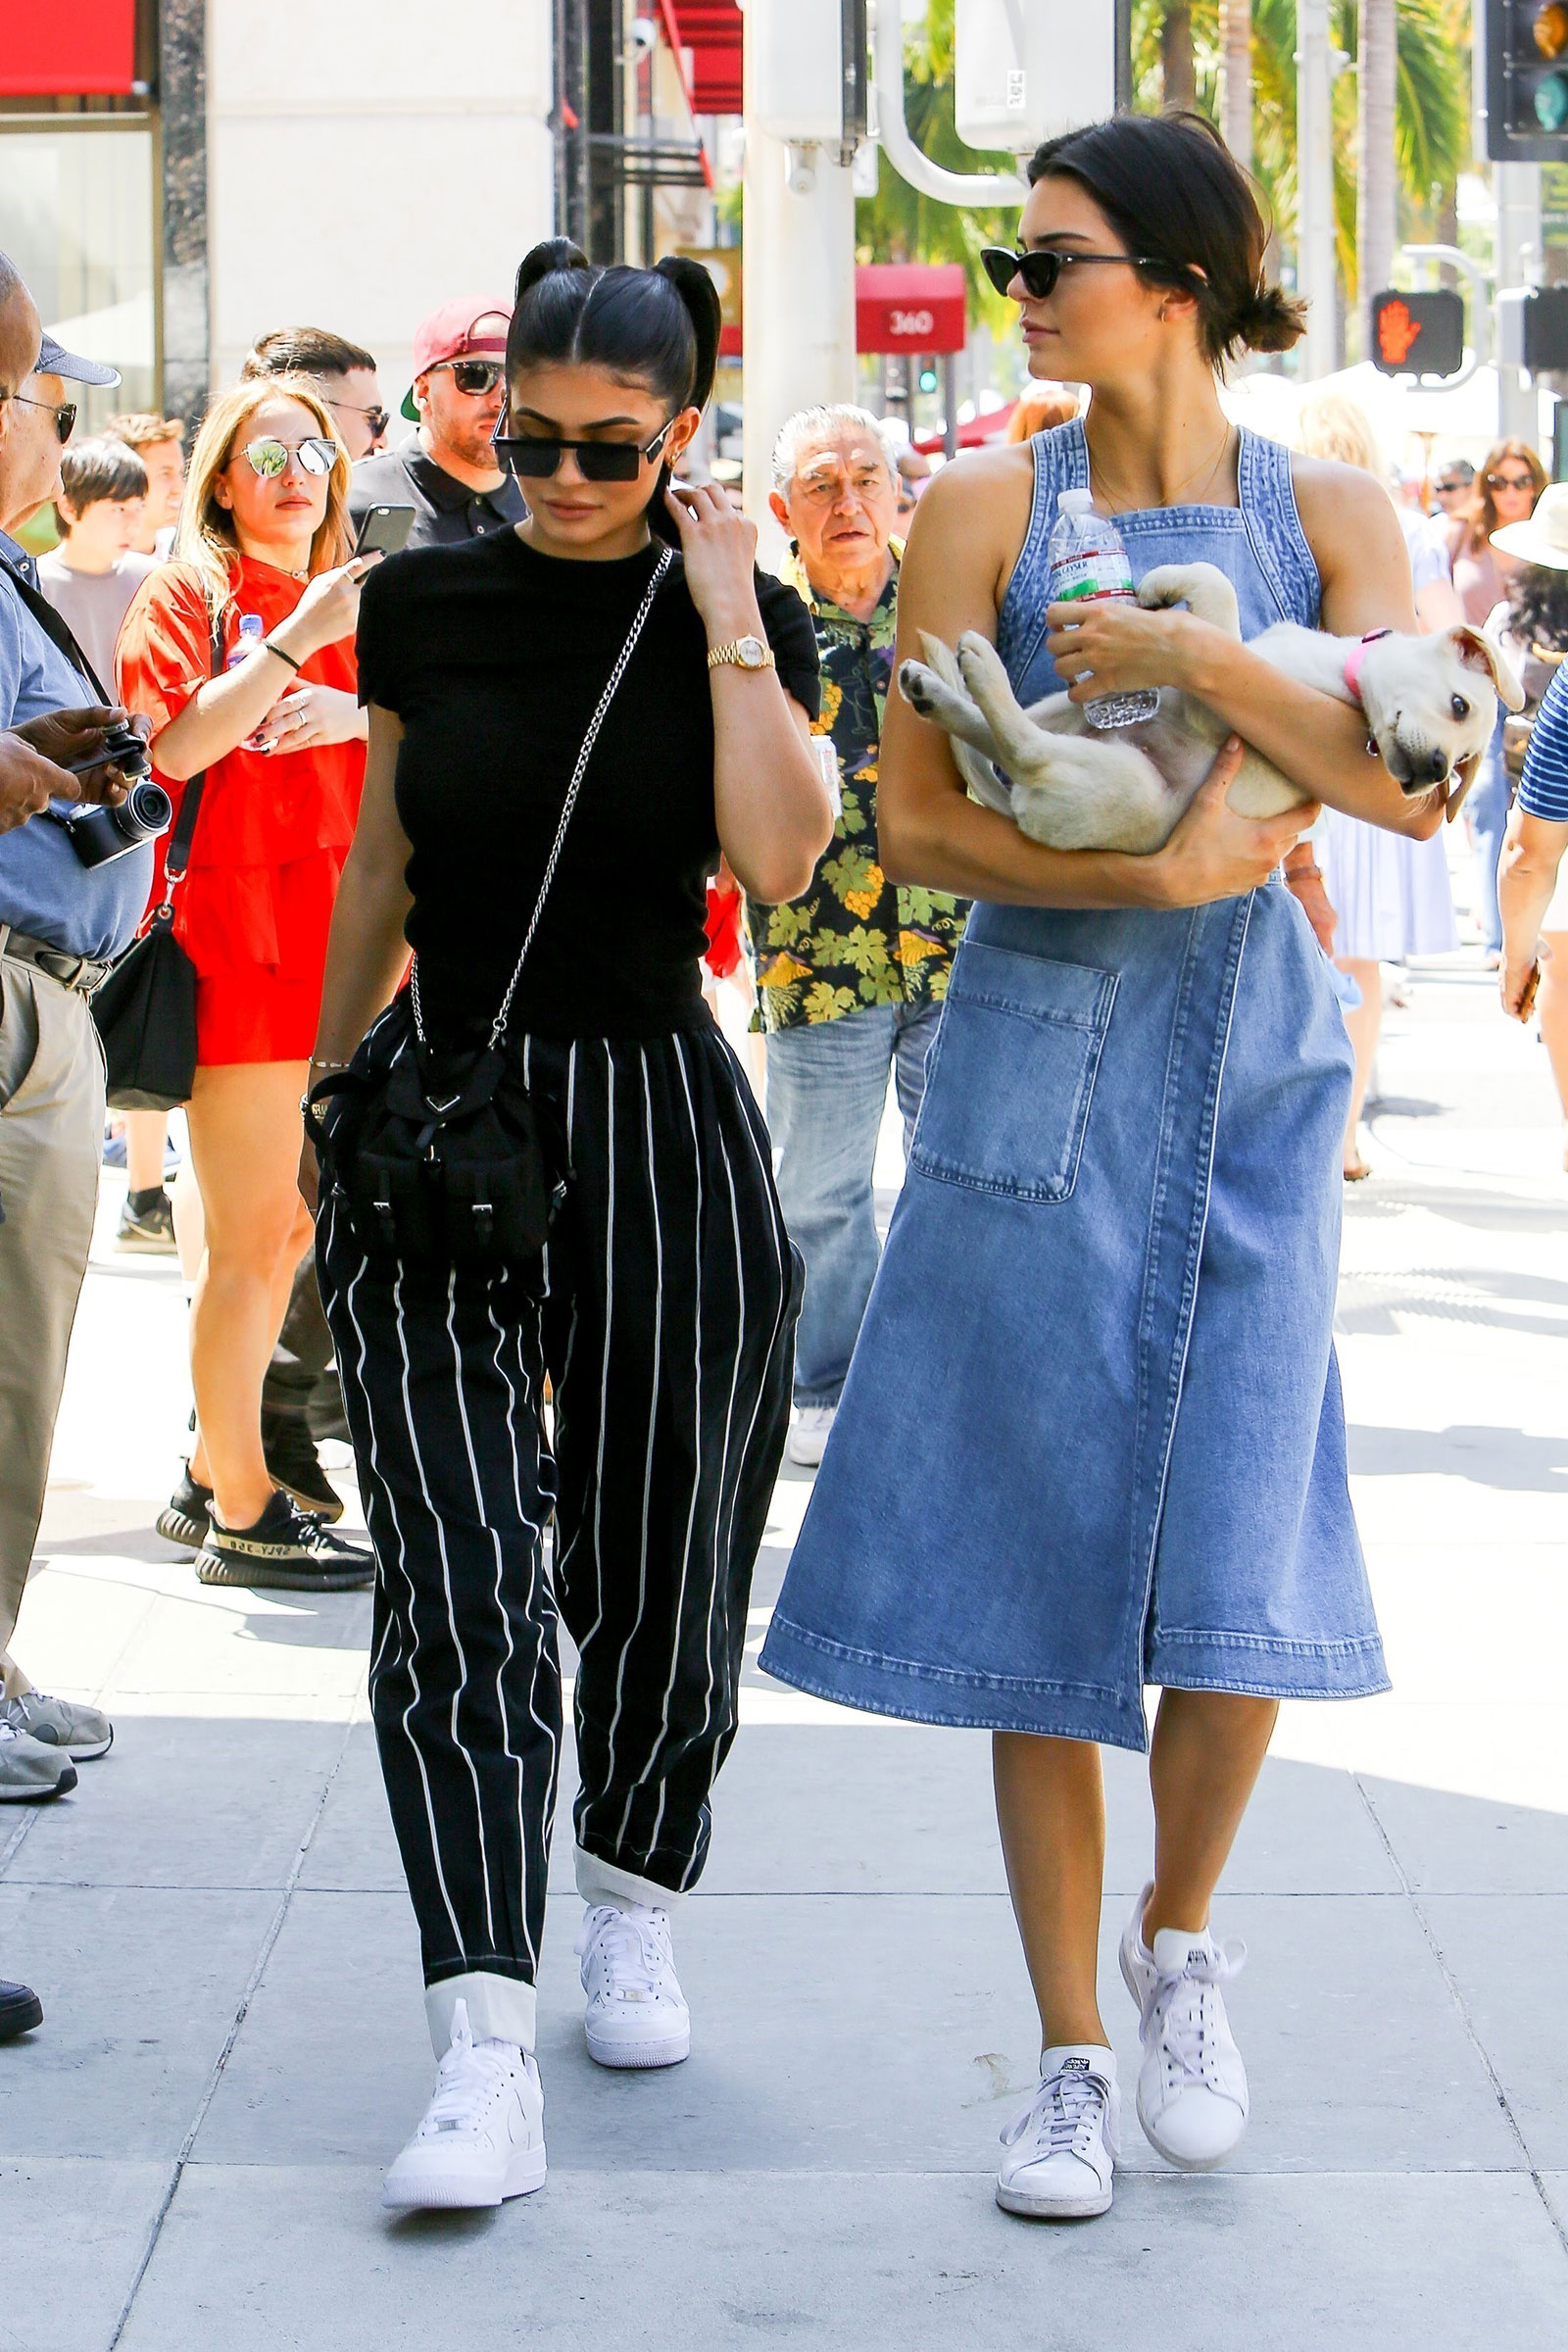 Kylie Jenner wears Celine vertical striped trousers while out and about with sister Kendall on Father's Day.